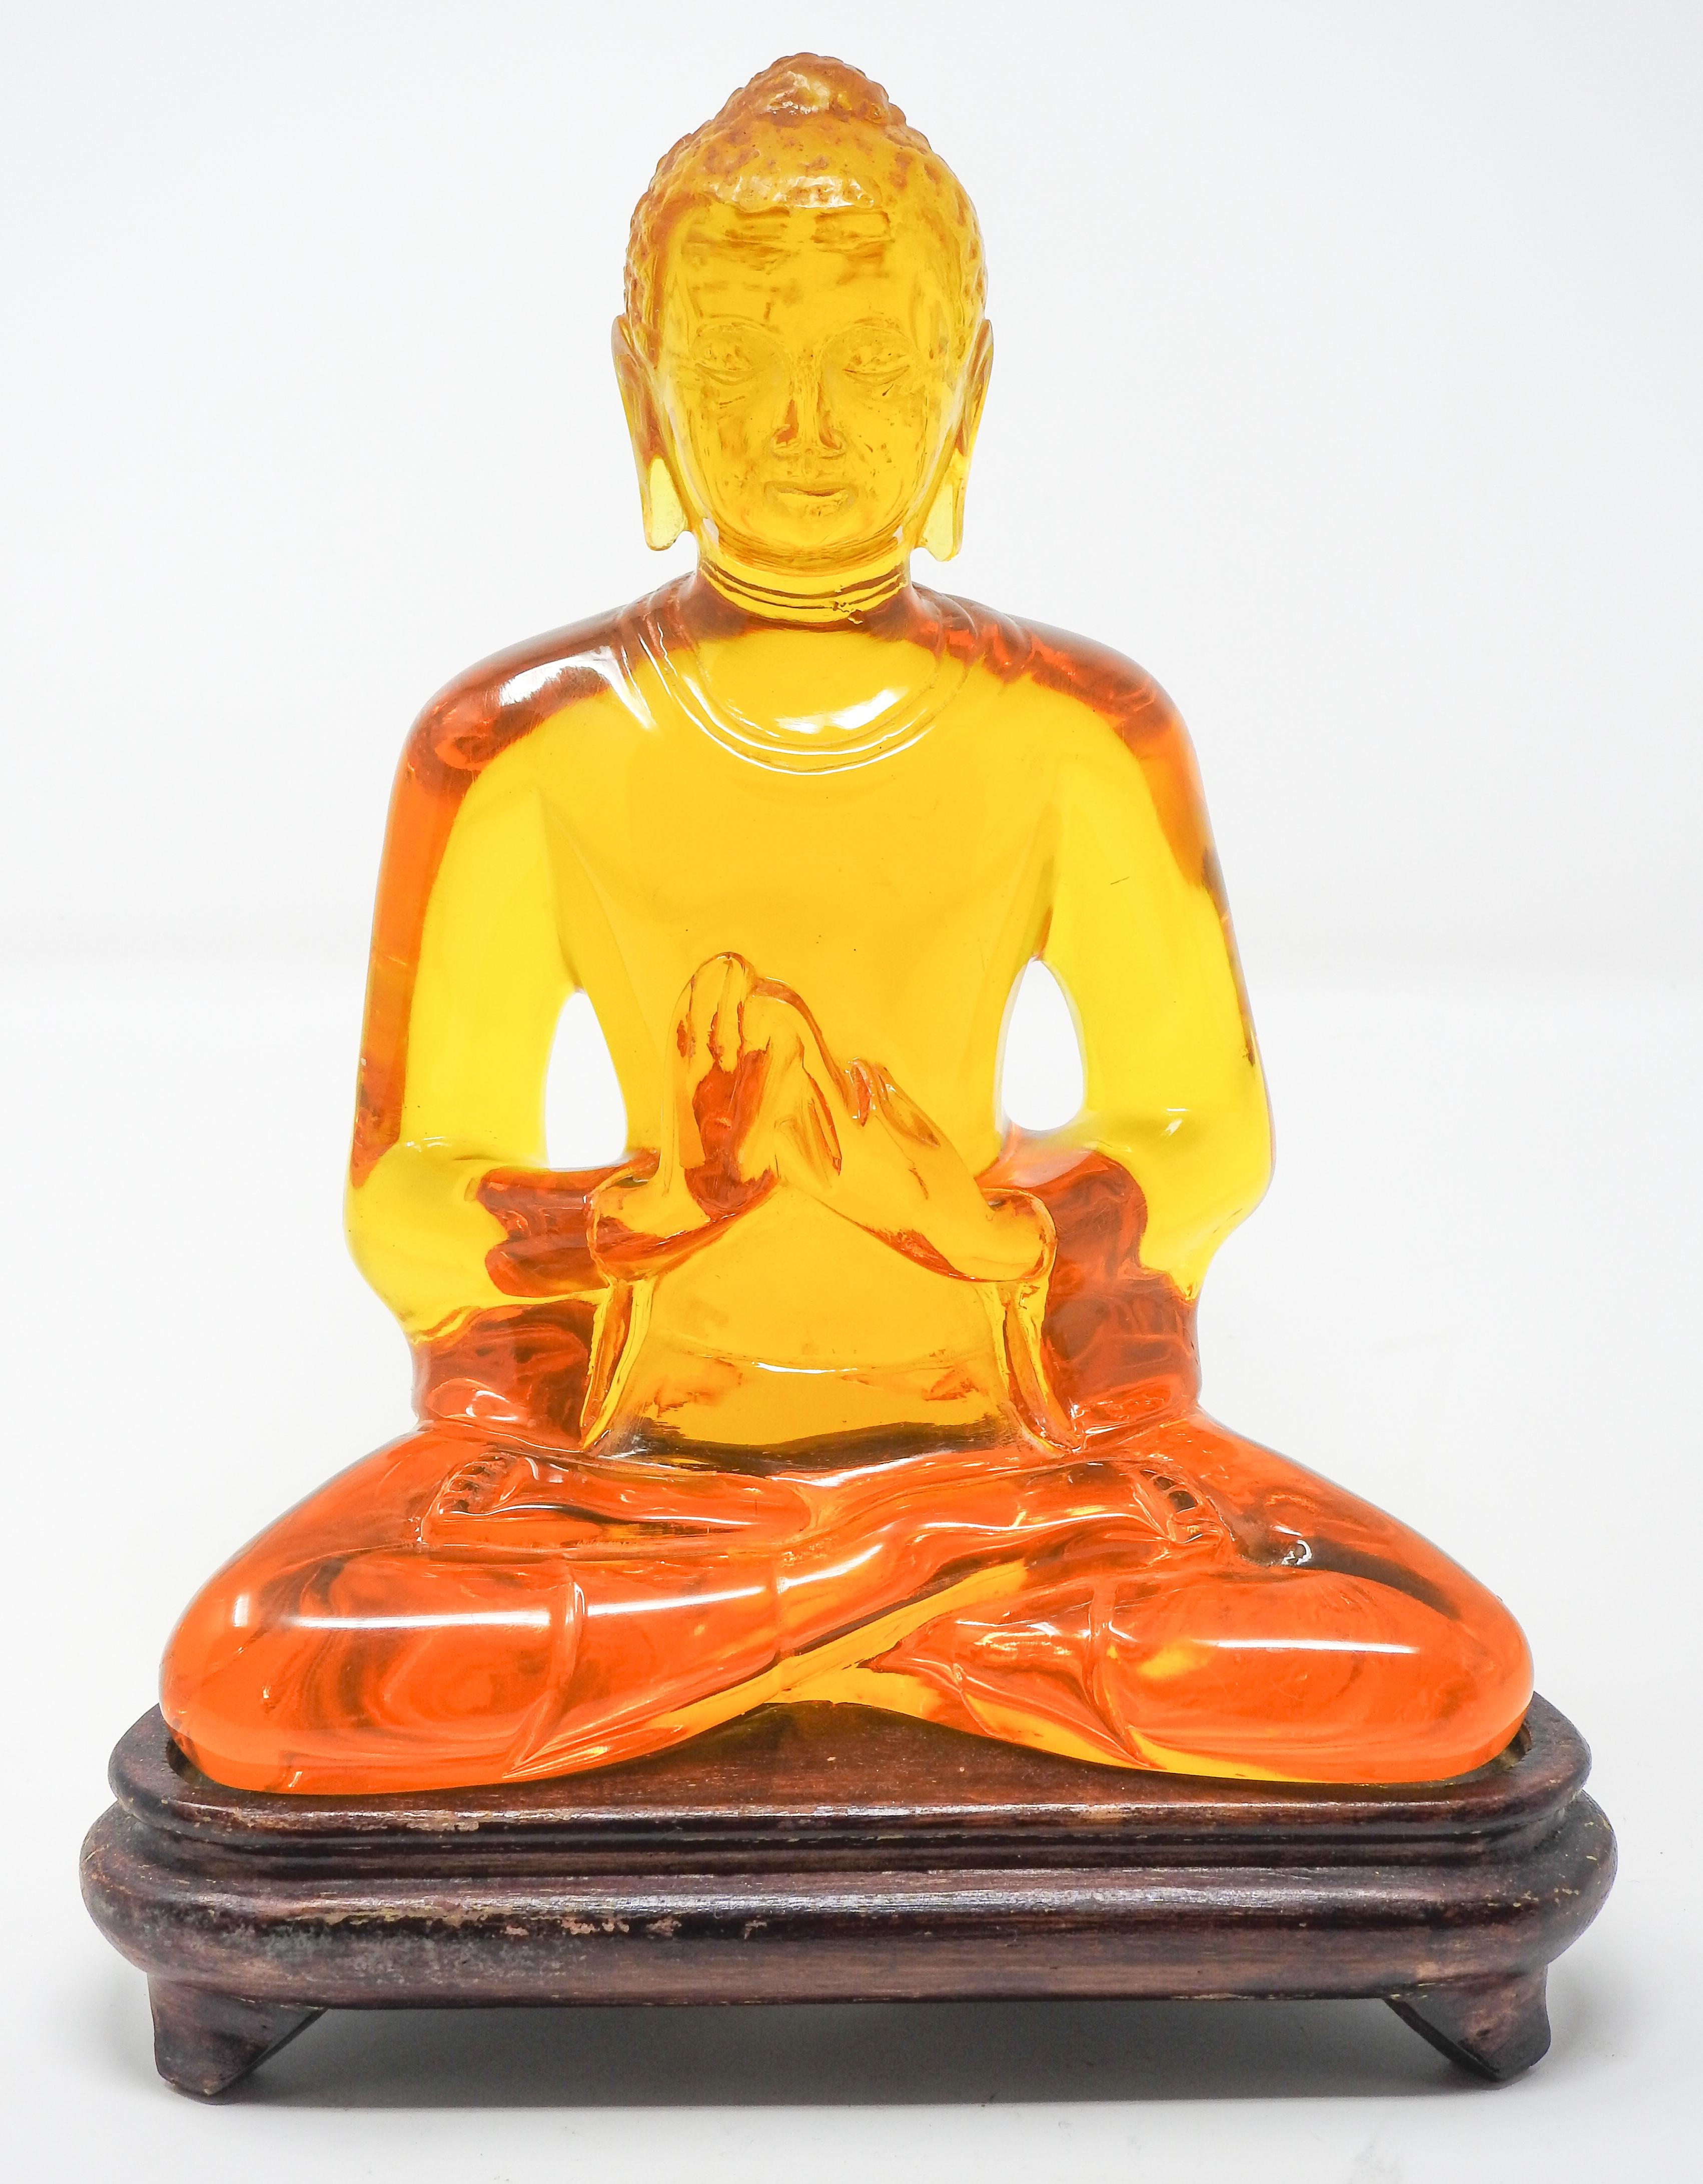 Offering this beautiful acrylic amber Buddha statue. The statue sits on a wooden base.